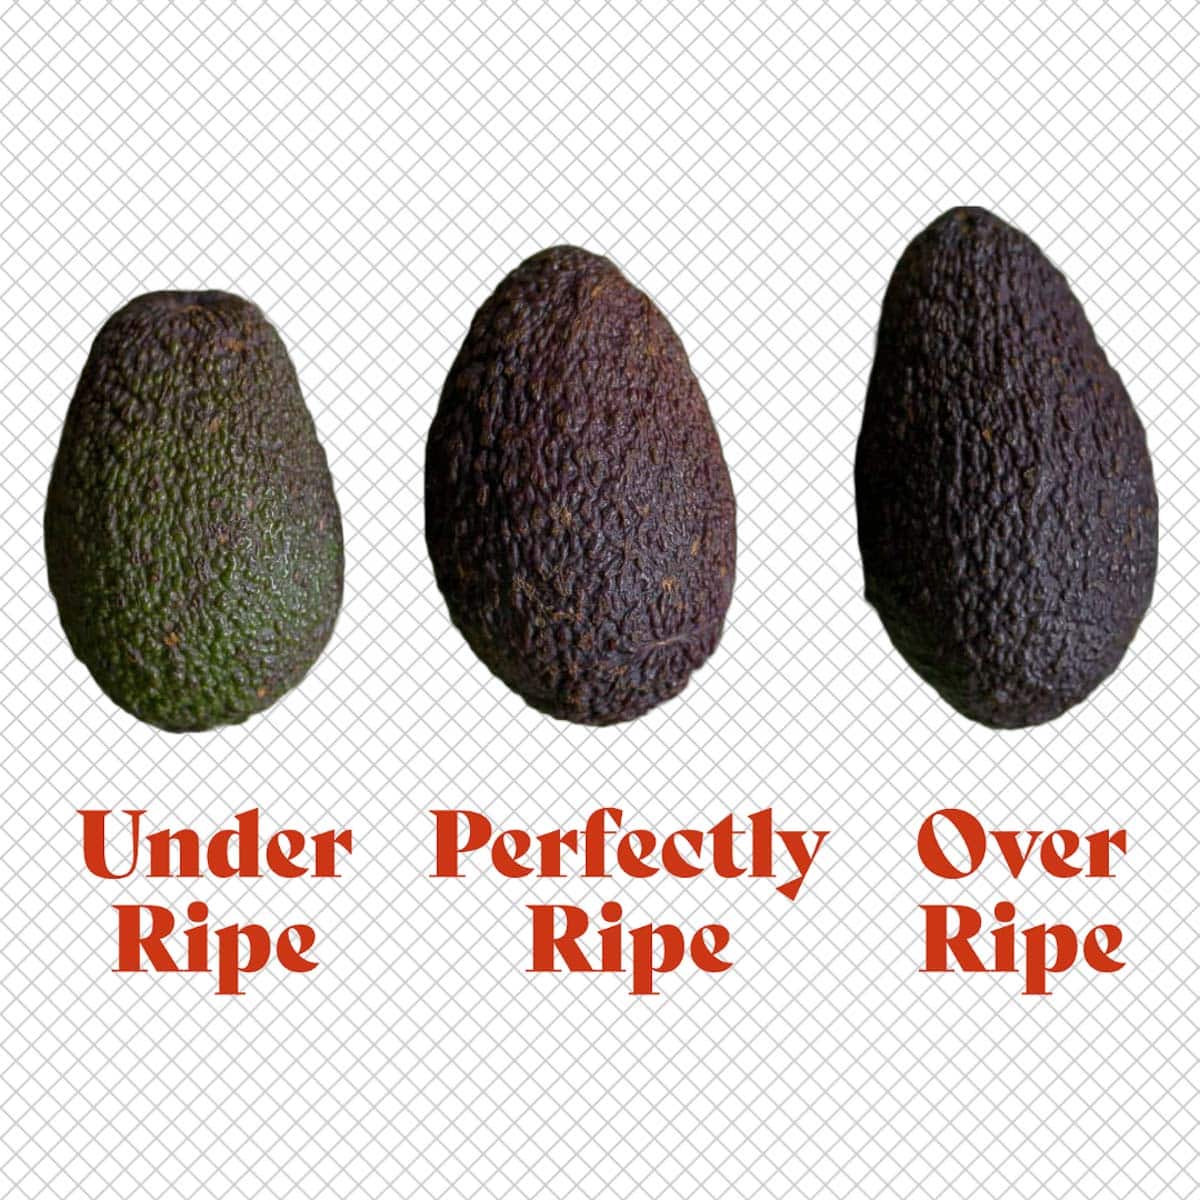 three avocados on a grid background with text underneath avocados